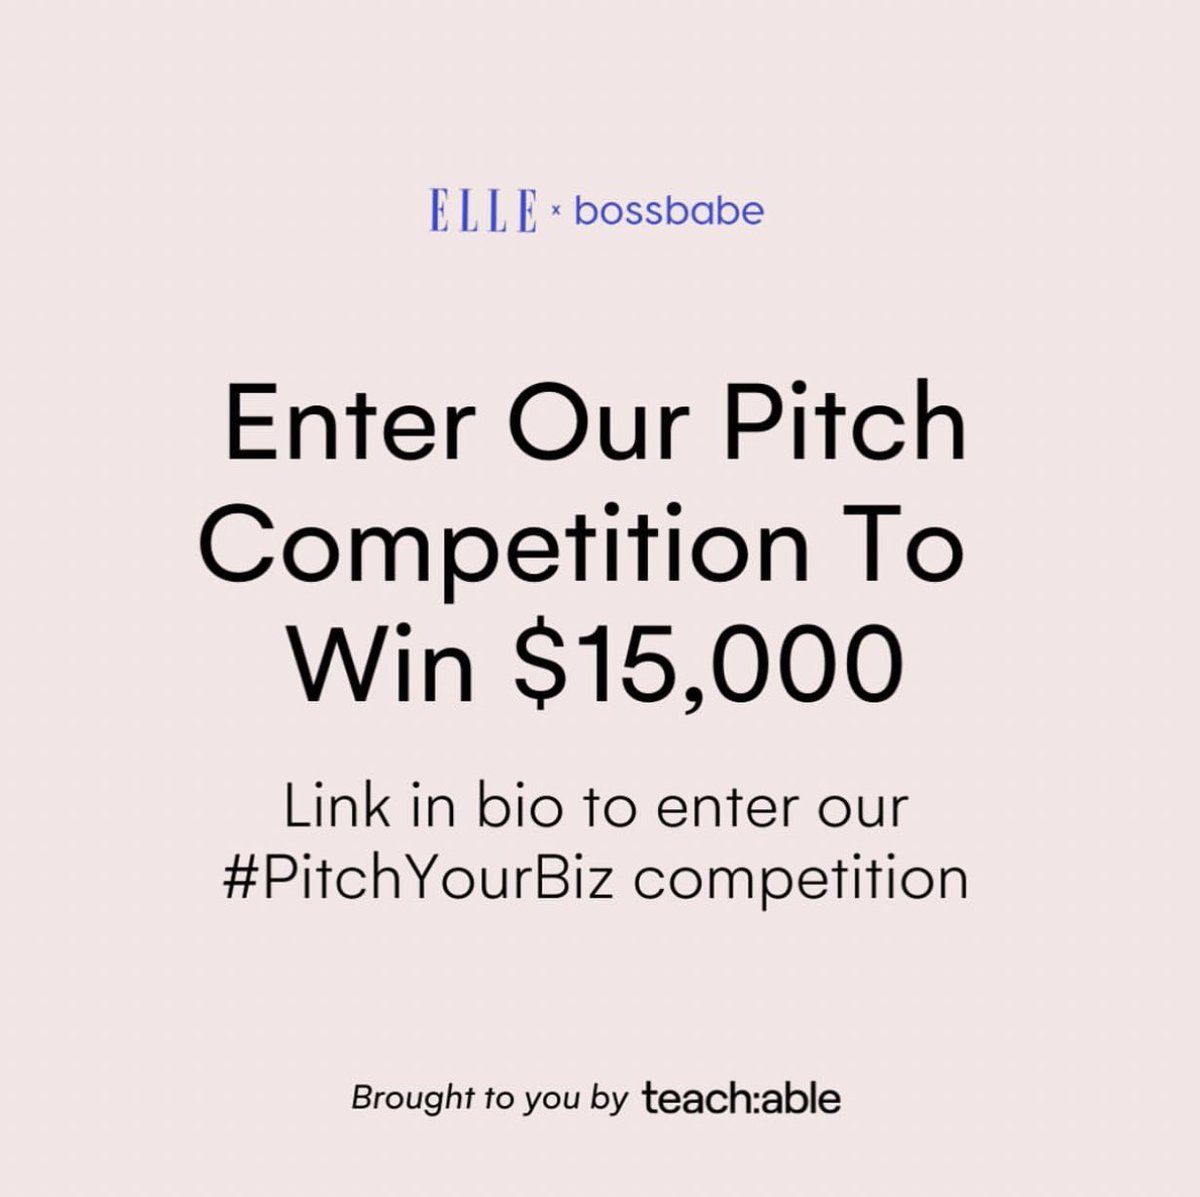 Elle x BossBabe have partnered up for the #PitchYourBiz pitch competition for all boss babes to win $15K. 

10 finalists will be chosen and the pitch contest is live on 10/23.

Finalists will be announced Aug. 3rd!

bossbabe.com/elle/